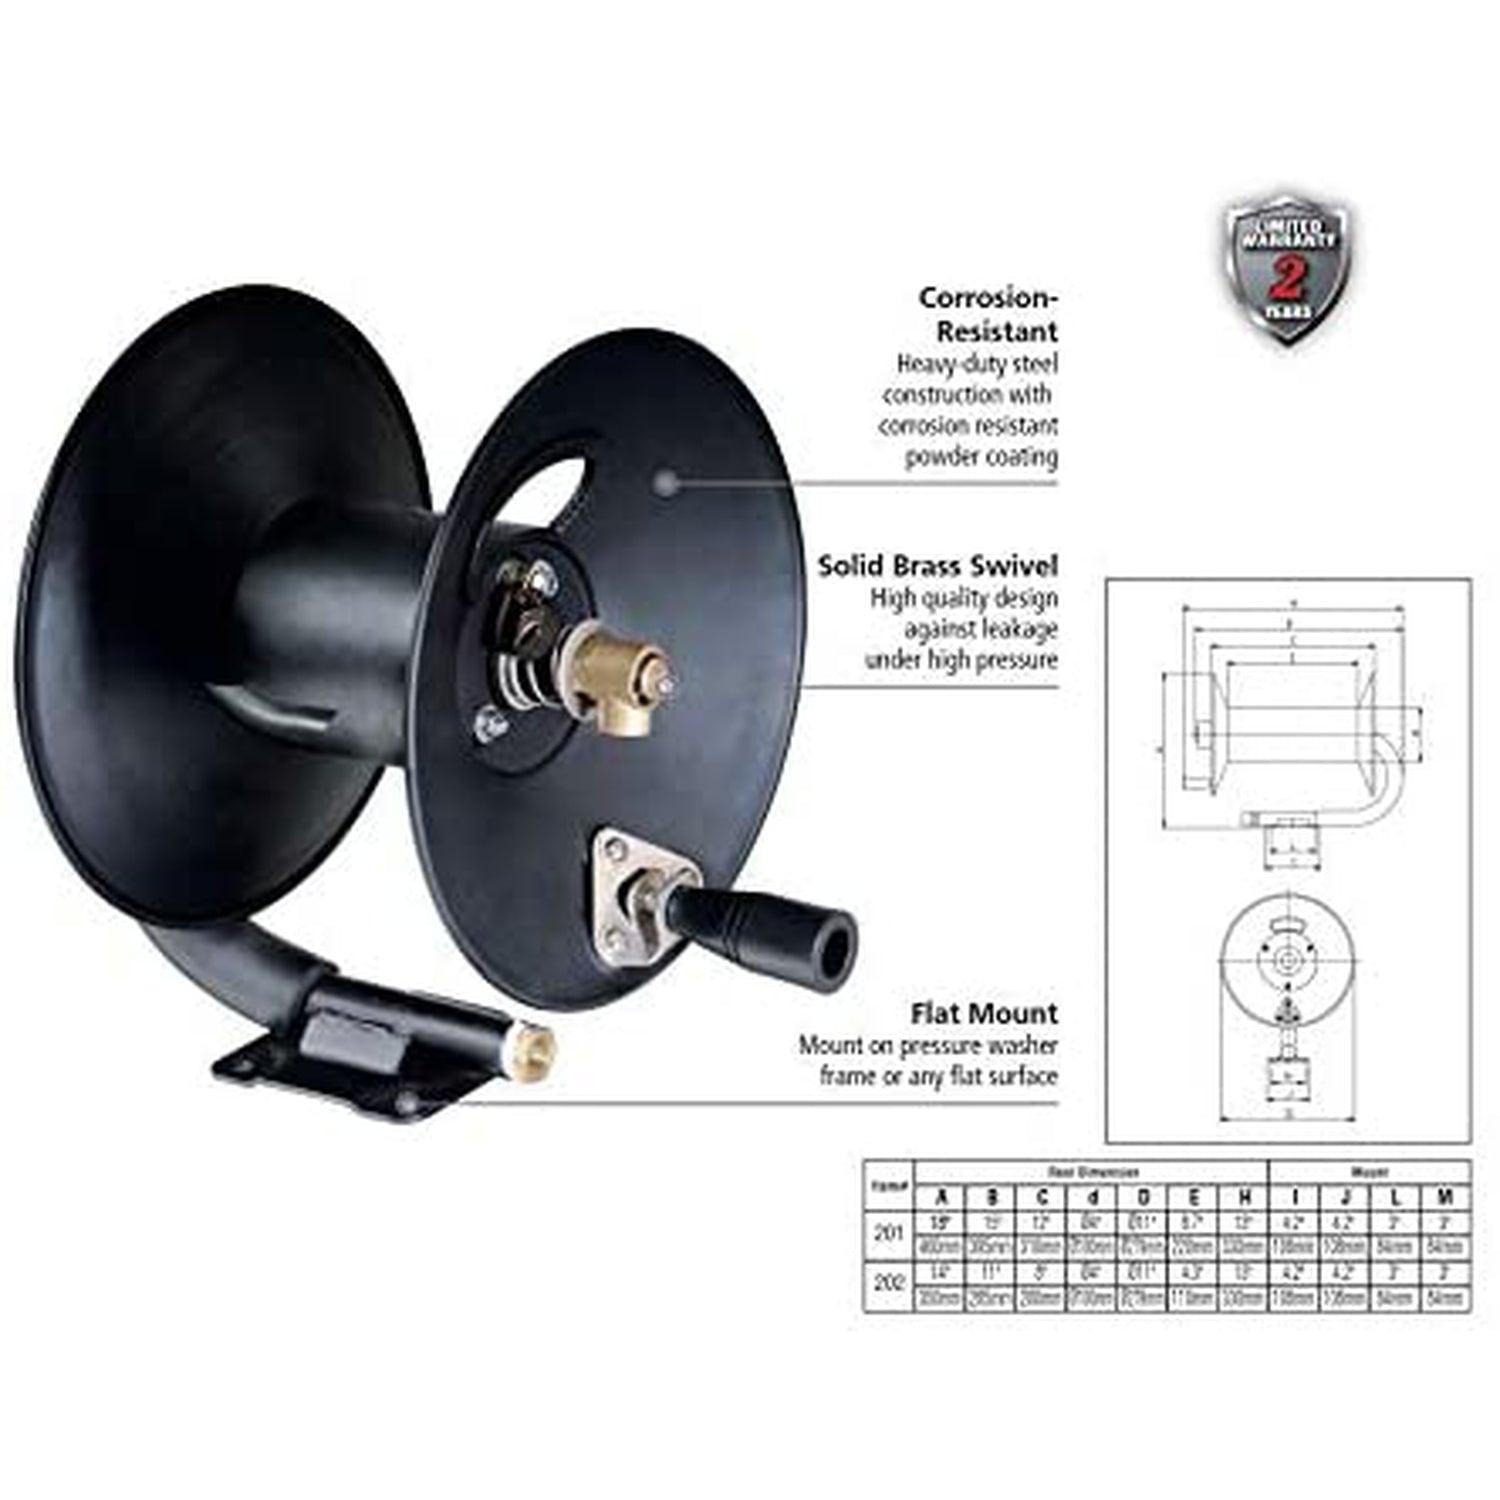 ReelWorks Air Hose Reel Retractable Hand Crank Reel 3/8" Inch x 50' Feet 300 PSI - DIY Tools by GreatCircleUS